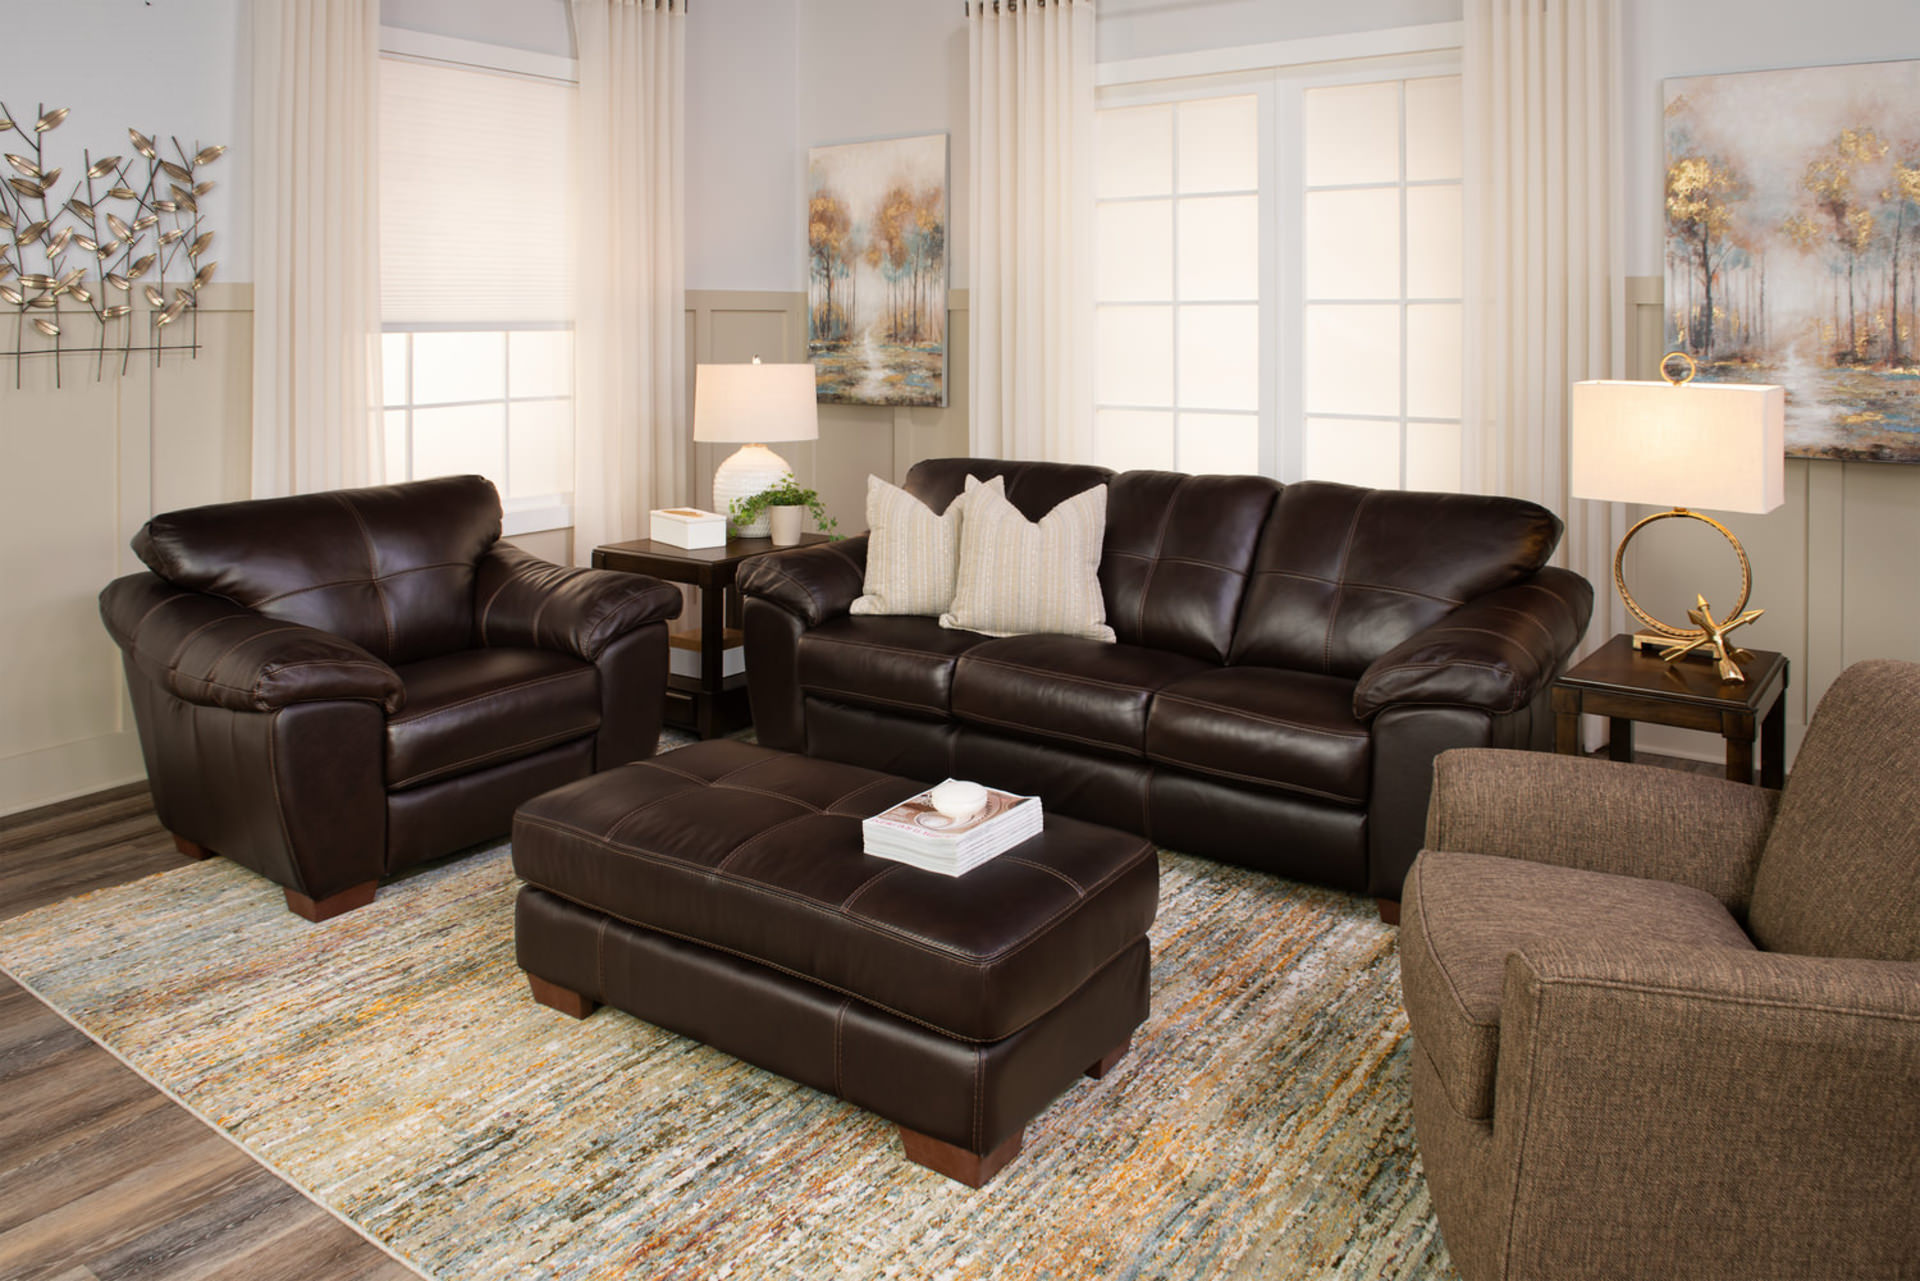 How to Choose Leather Furniture - design blog by HOM Furniture